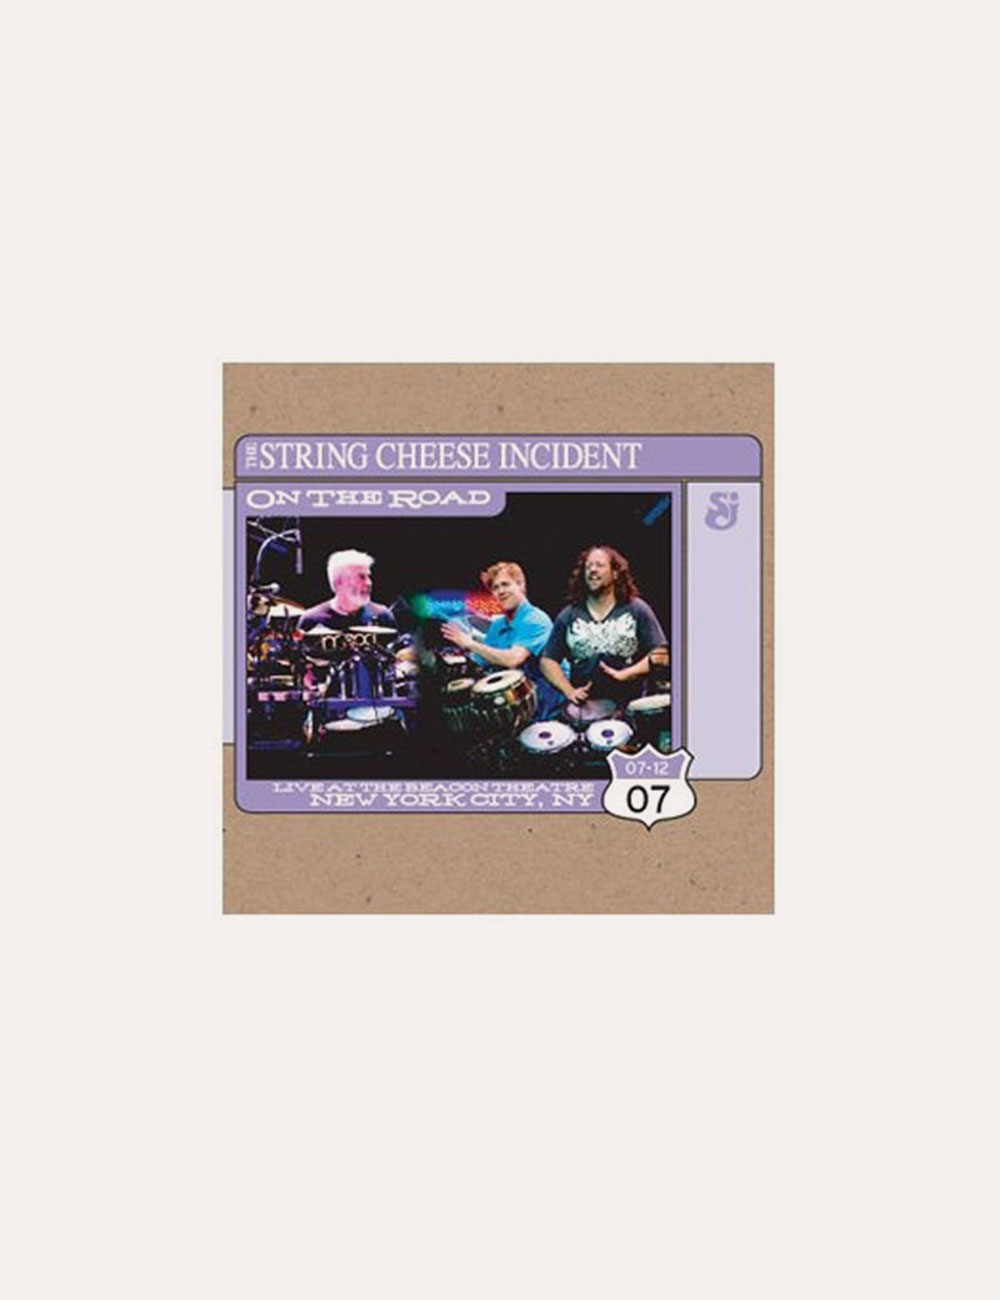 The String Cheese Incident - Merch - On The Road July 12 , 2007 CD